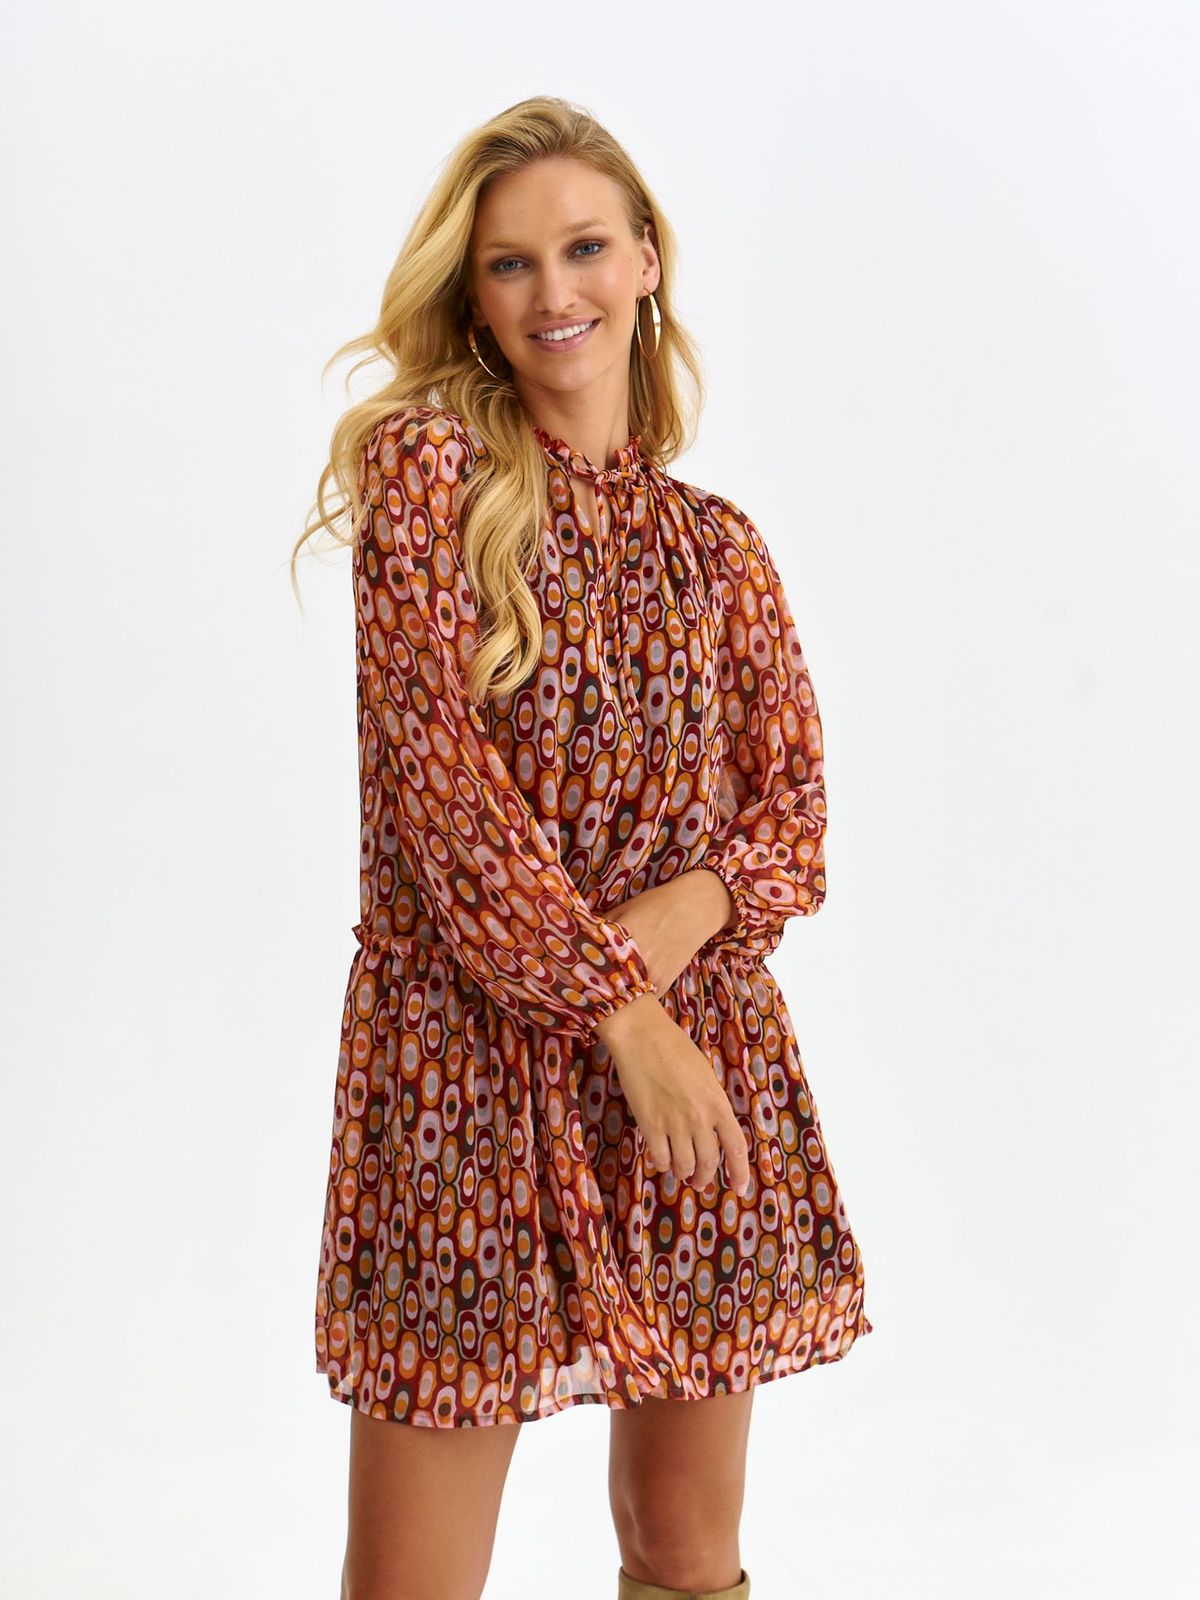 Dress from veil fabric short cut loose fit with puffed sleeves